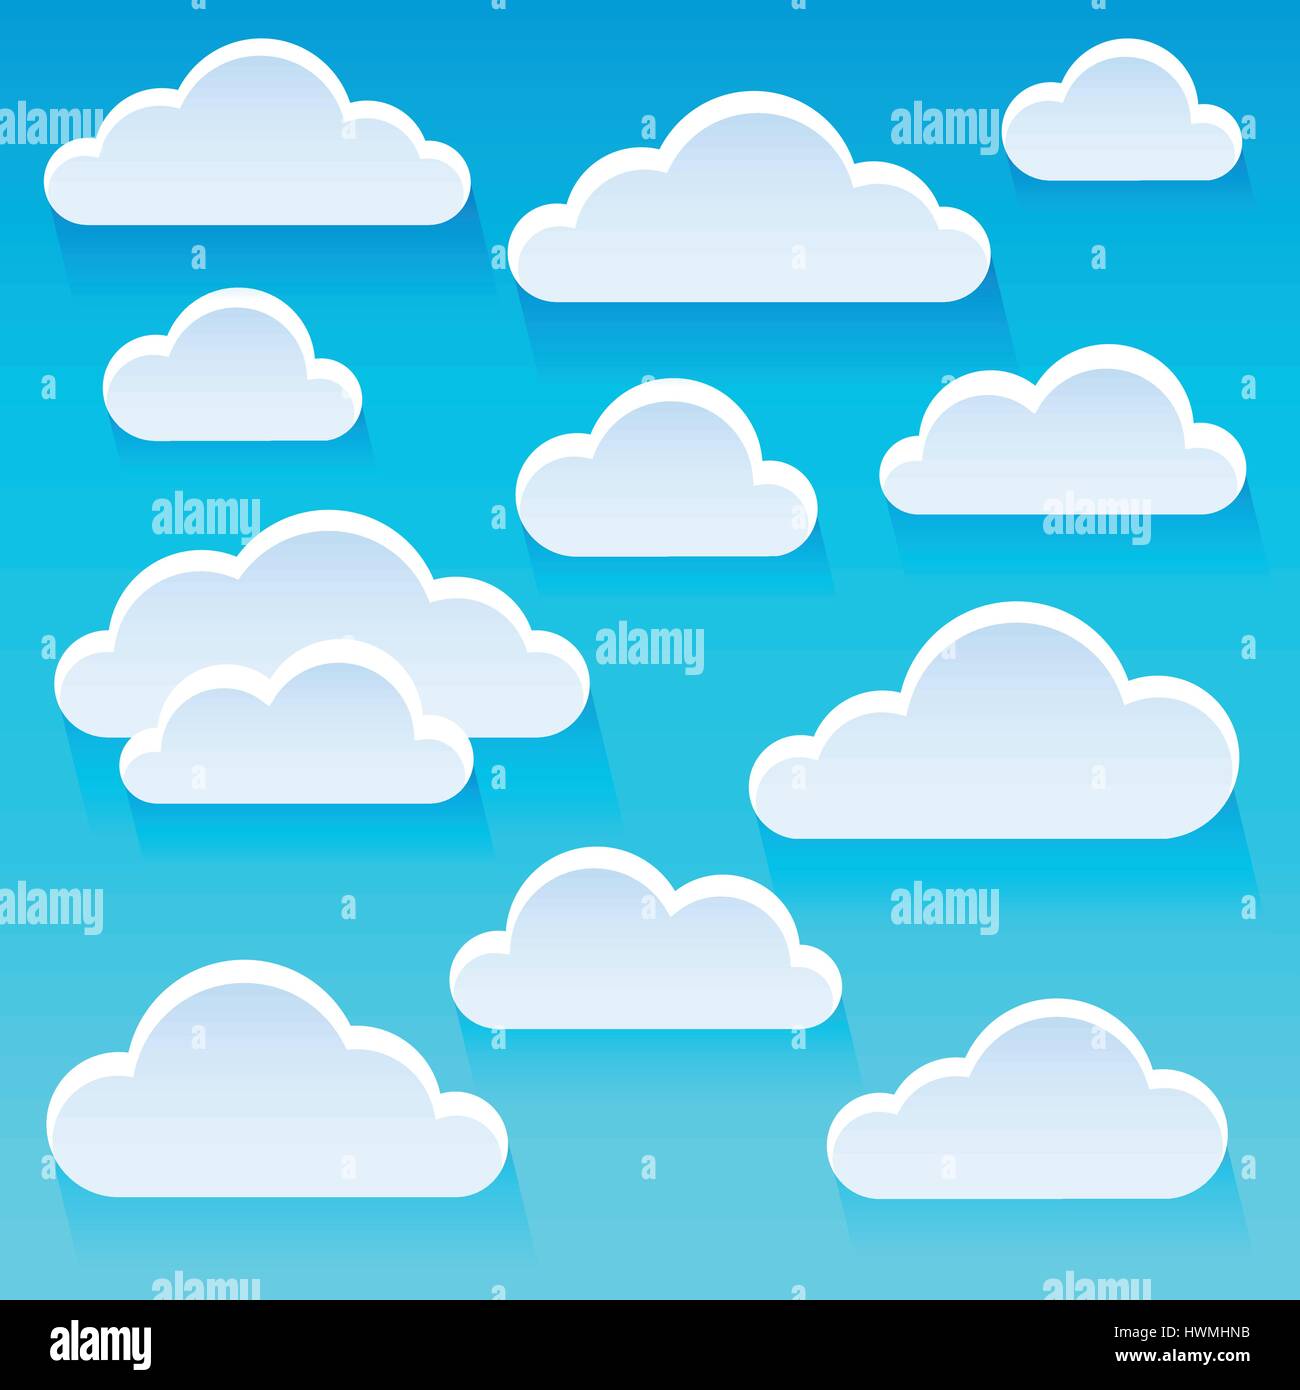 Stylized clouds theme image 1 - eps10 vector illustration. Stock Vector